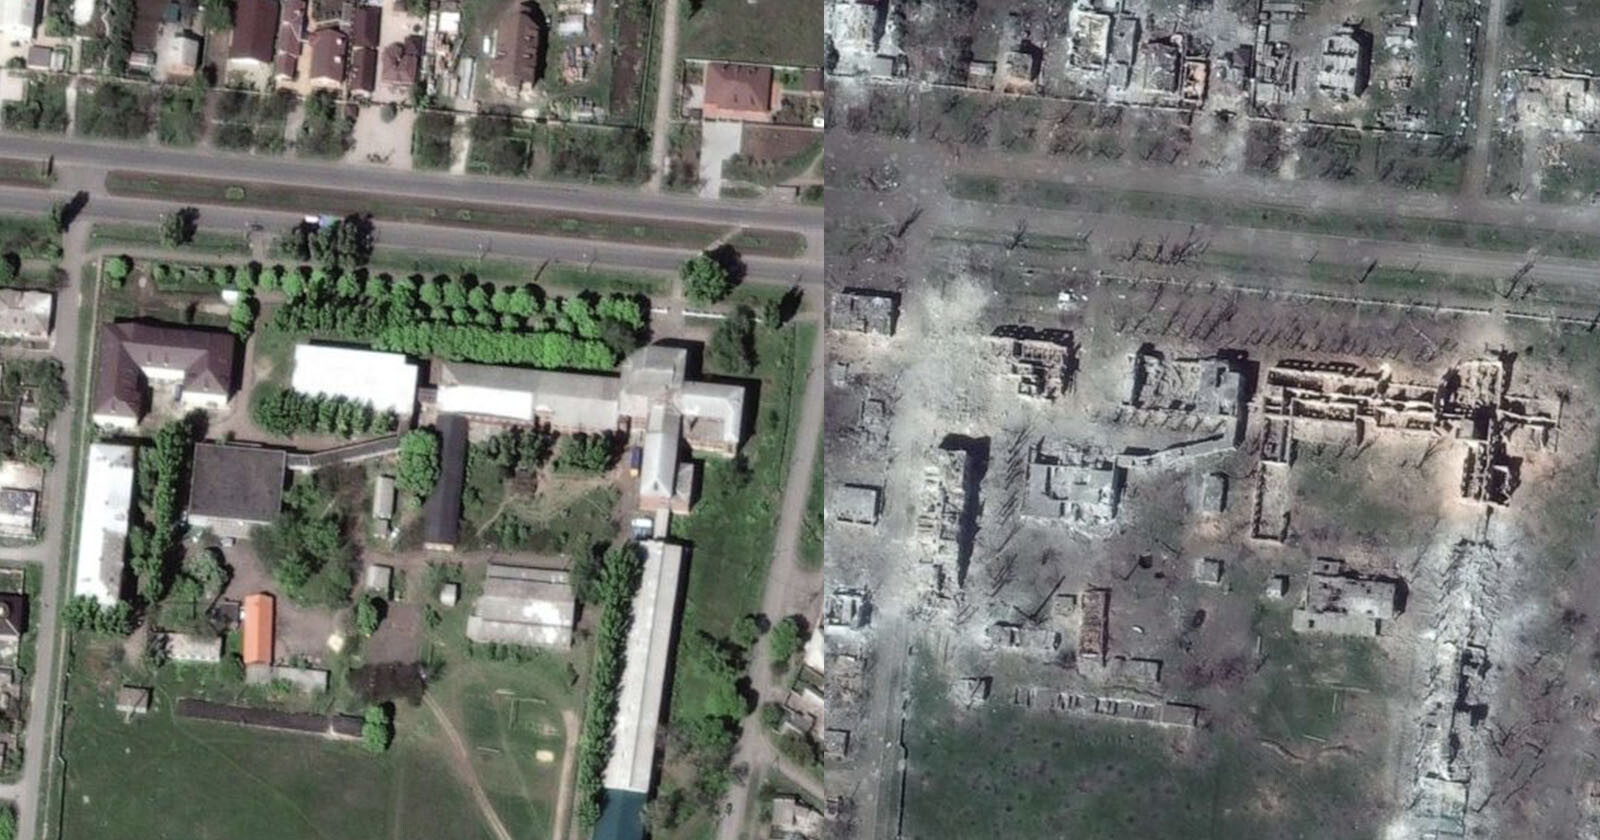  shocking before after satellite imagery embattled city 